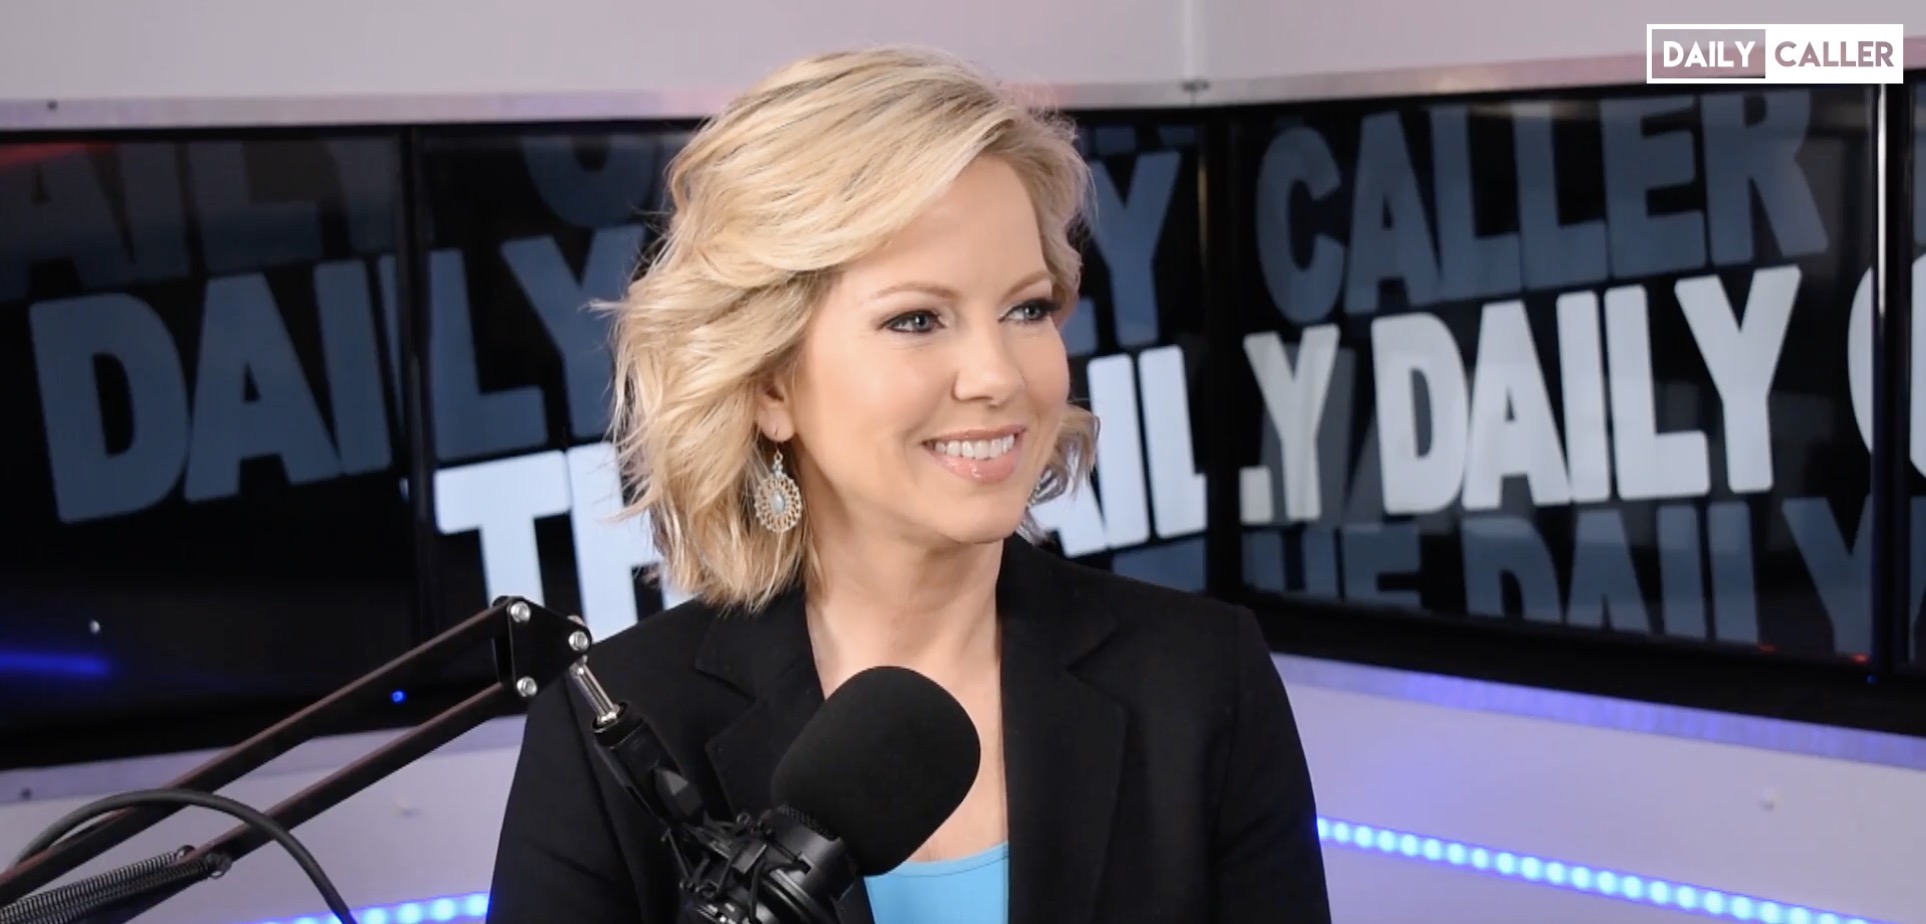 Democratic Debate Stage Is Set And The Shannon Bream Interview | The Daily Caller